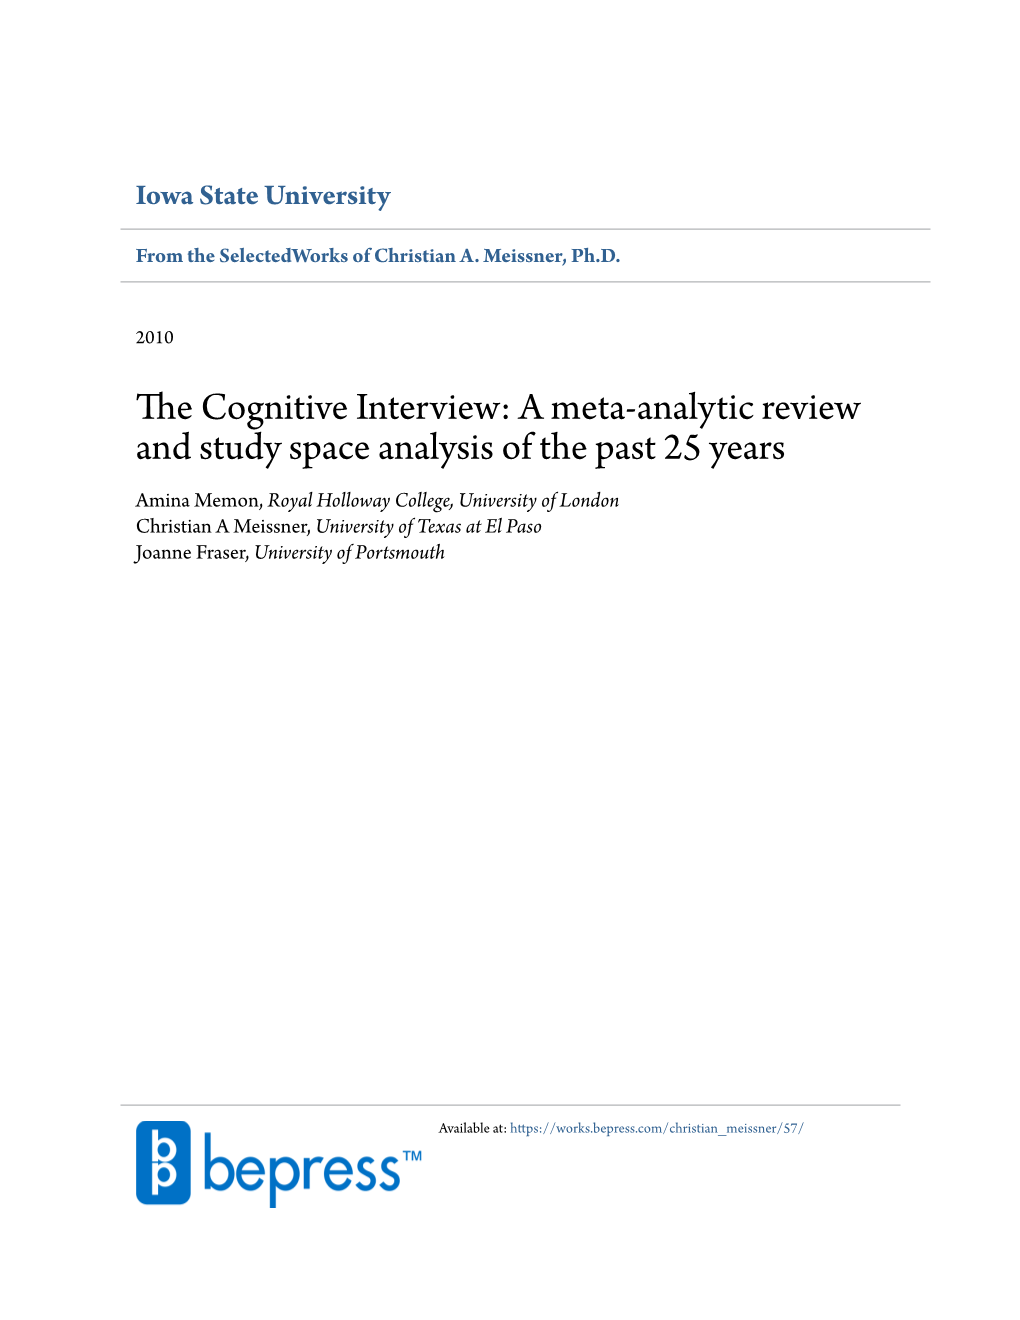 THE COGNITIVE INTERVIEW: a Meta-Analytic Review and Study Space Analysis of the Past 25 Years